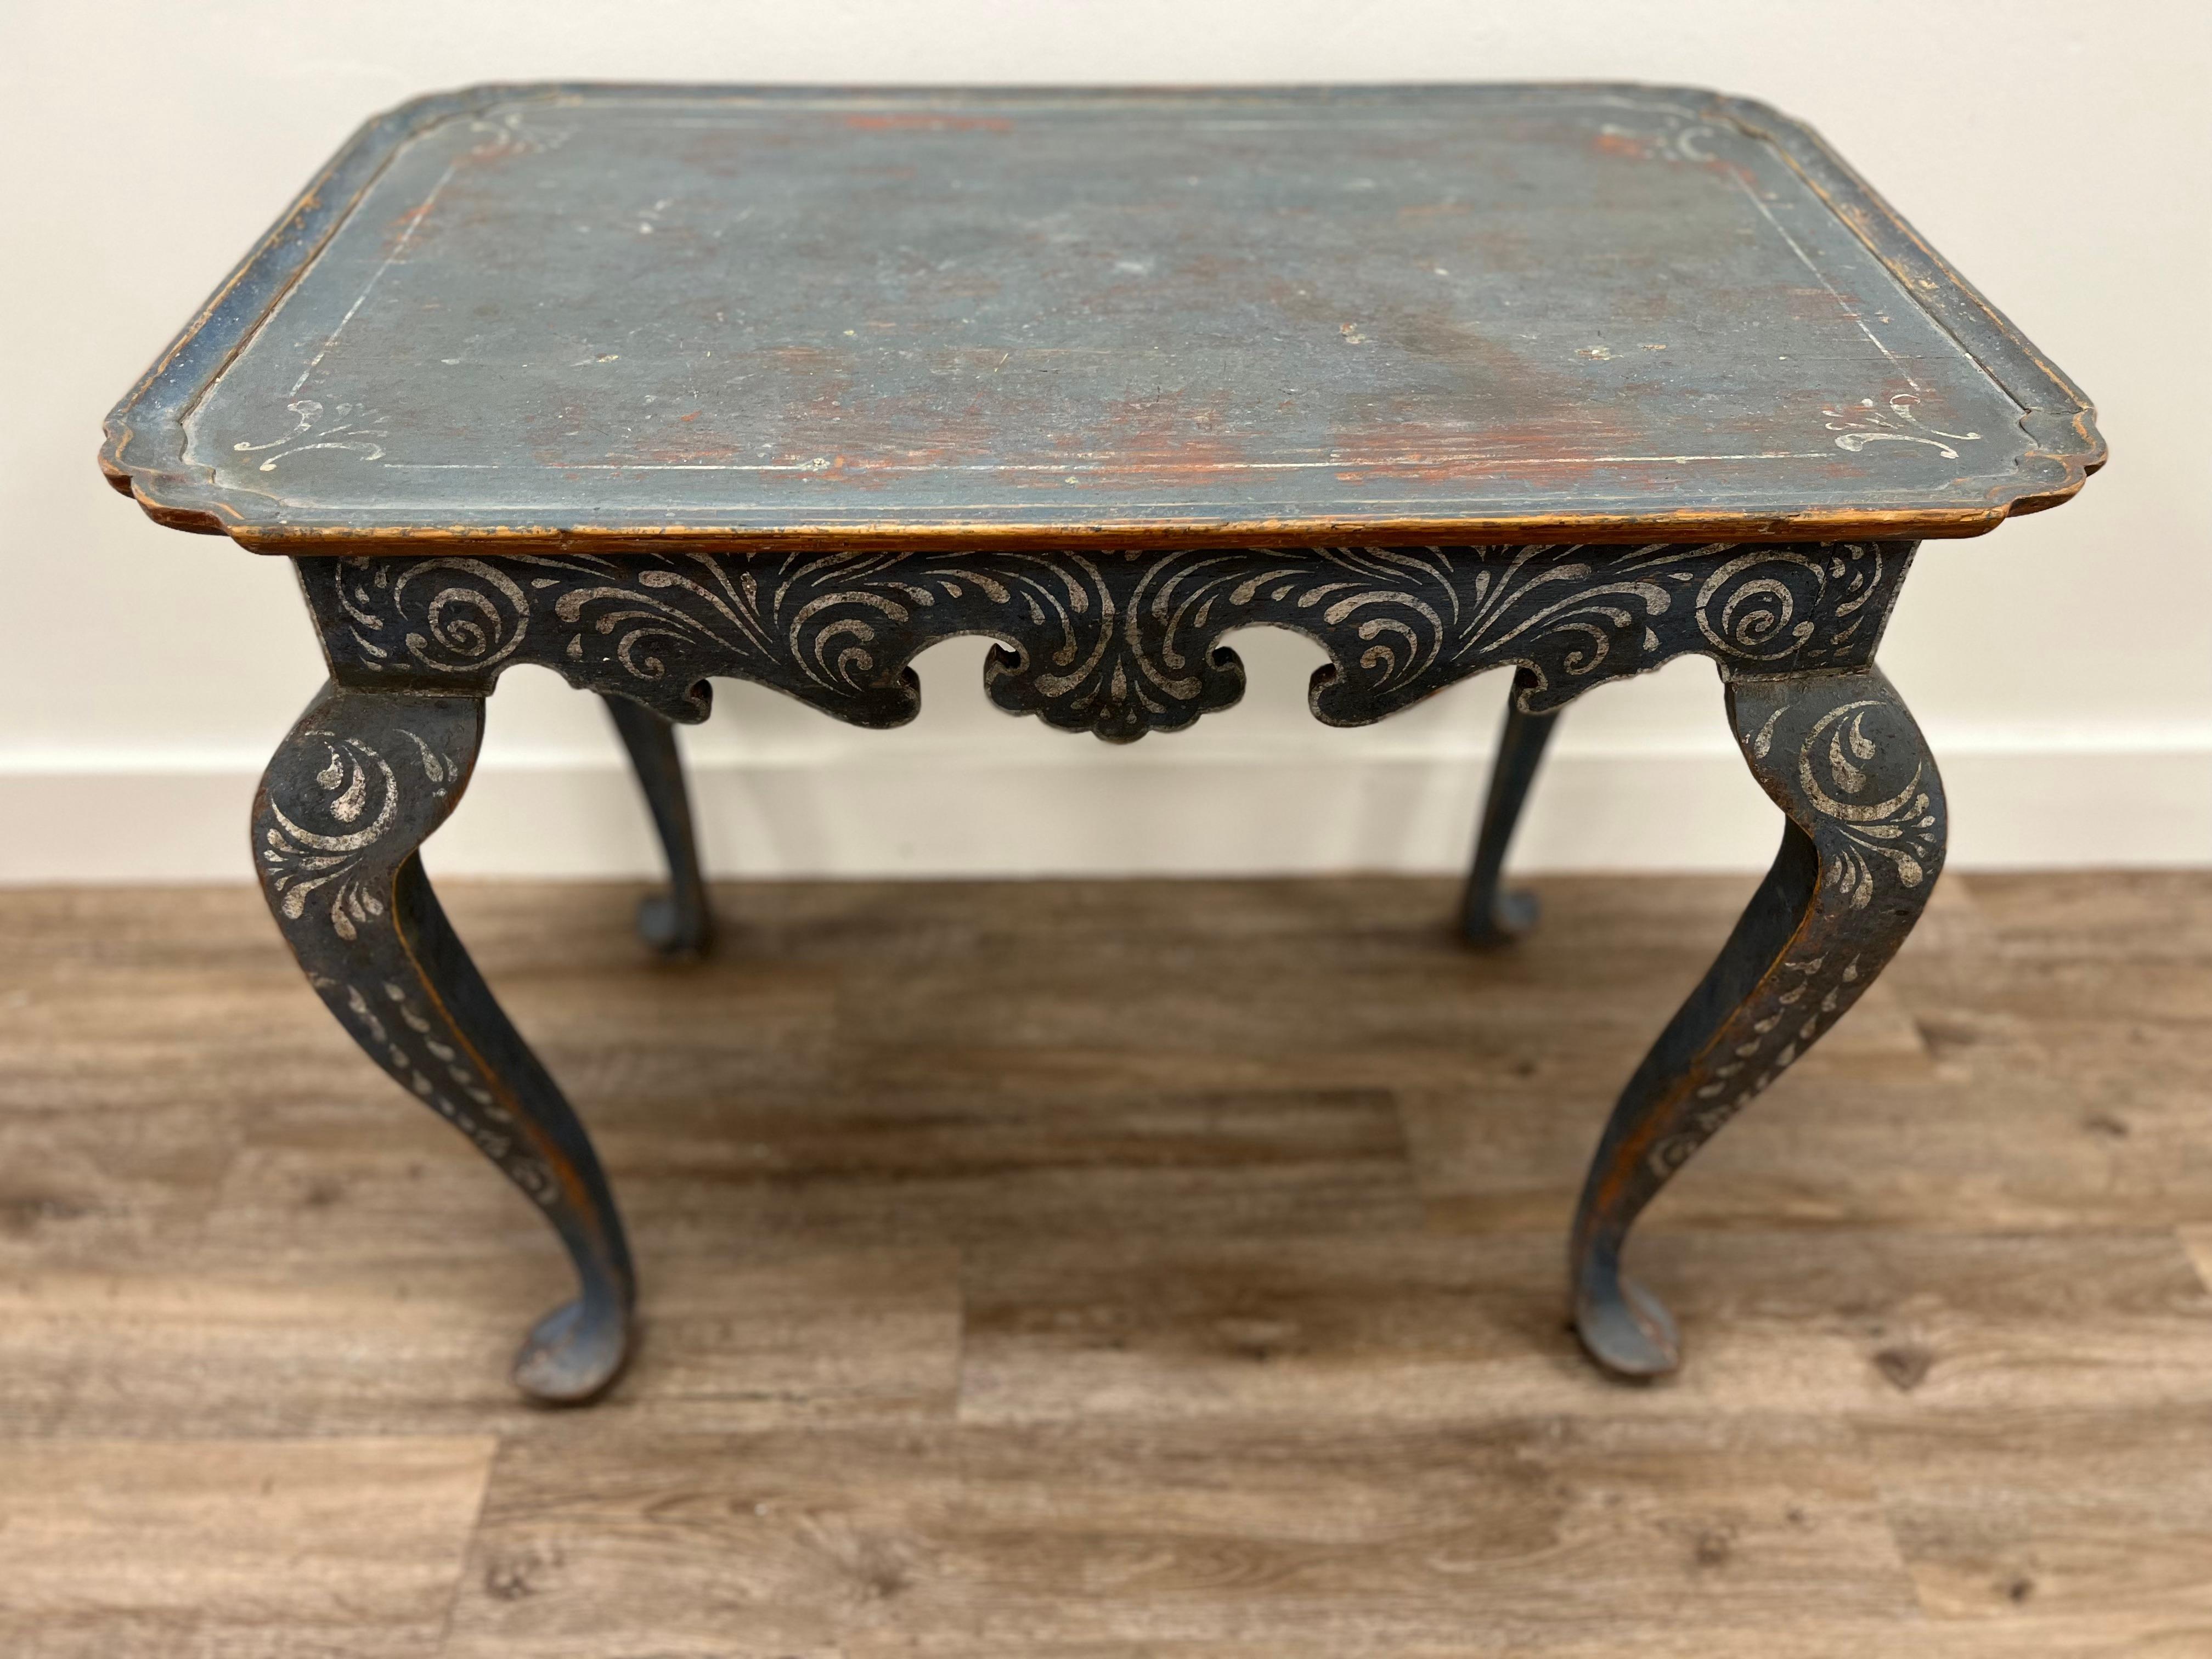 A Swedish Rococo table with rectangular top and scalloped corners, over decorative carved base atop cabriole legs. In original dark blue paint with hand-painted white scroll design.